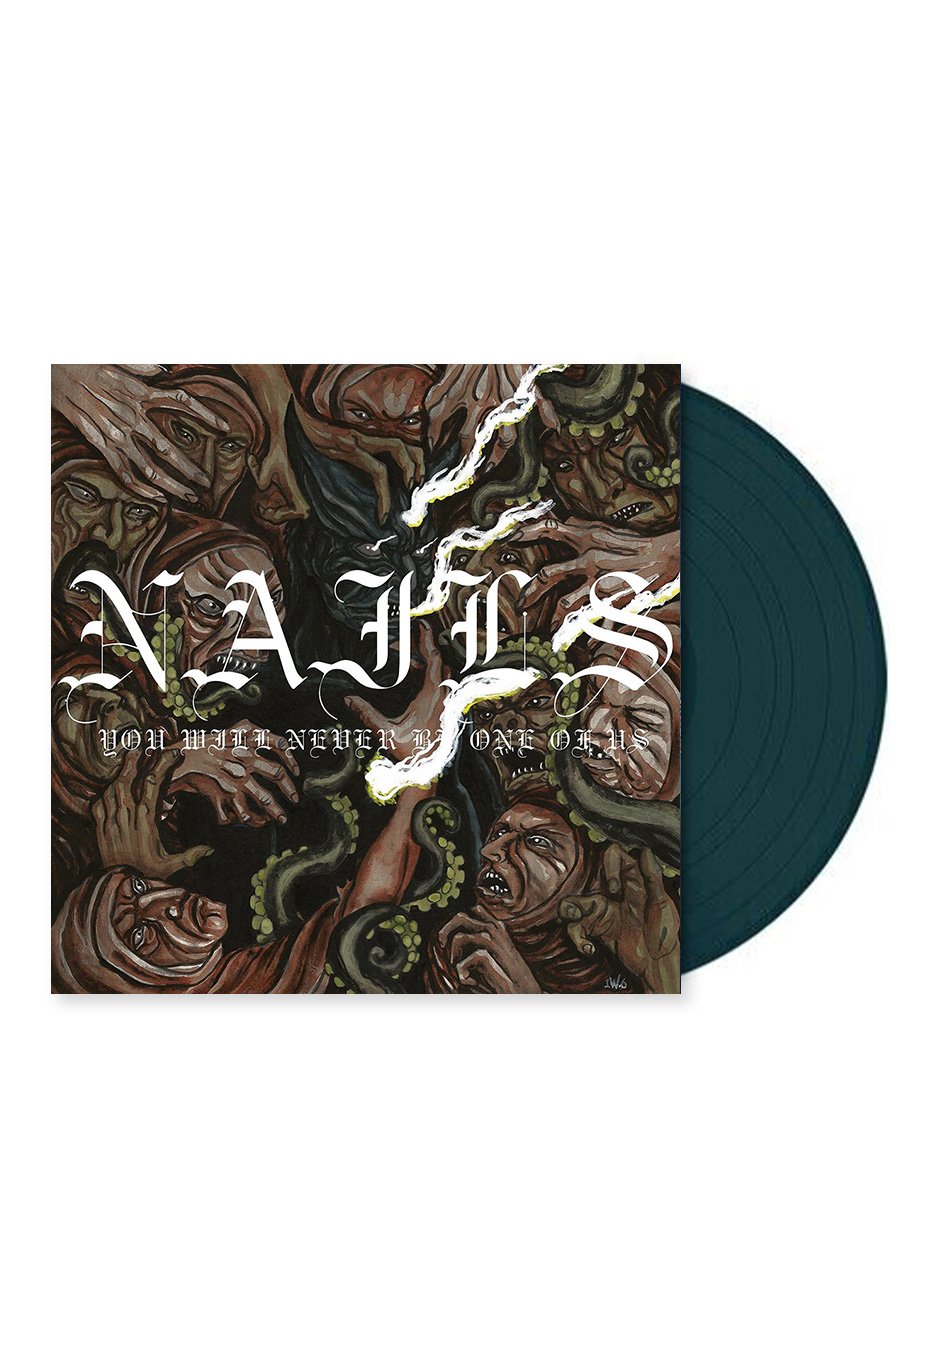 Nails - You Will Never Be One Of Us Ltd. Sea Blue - Colored Vinyl